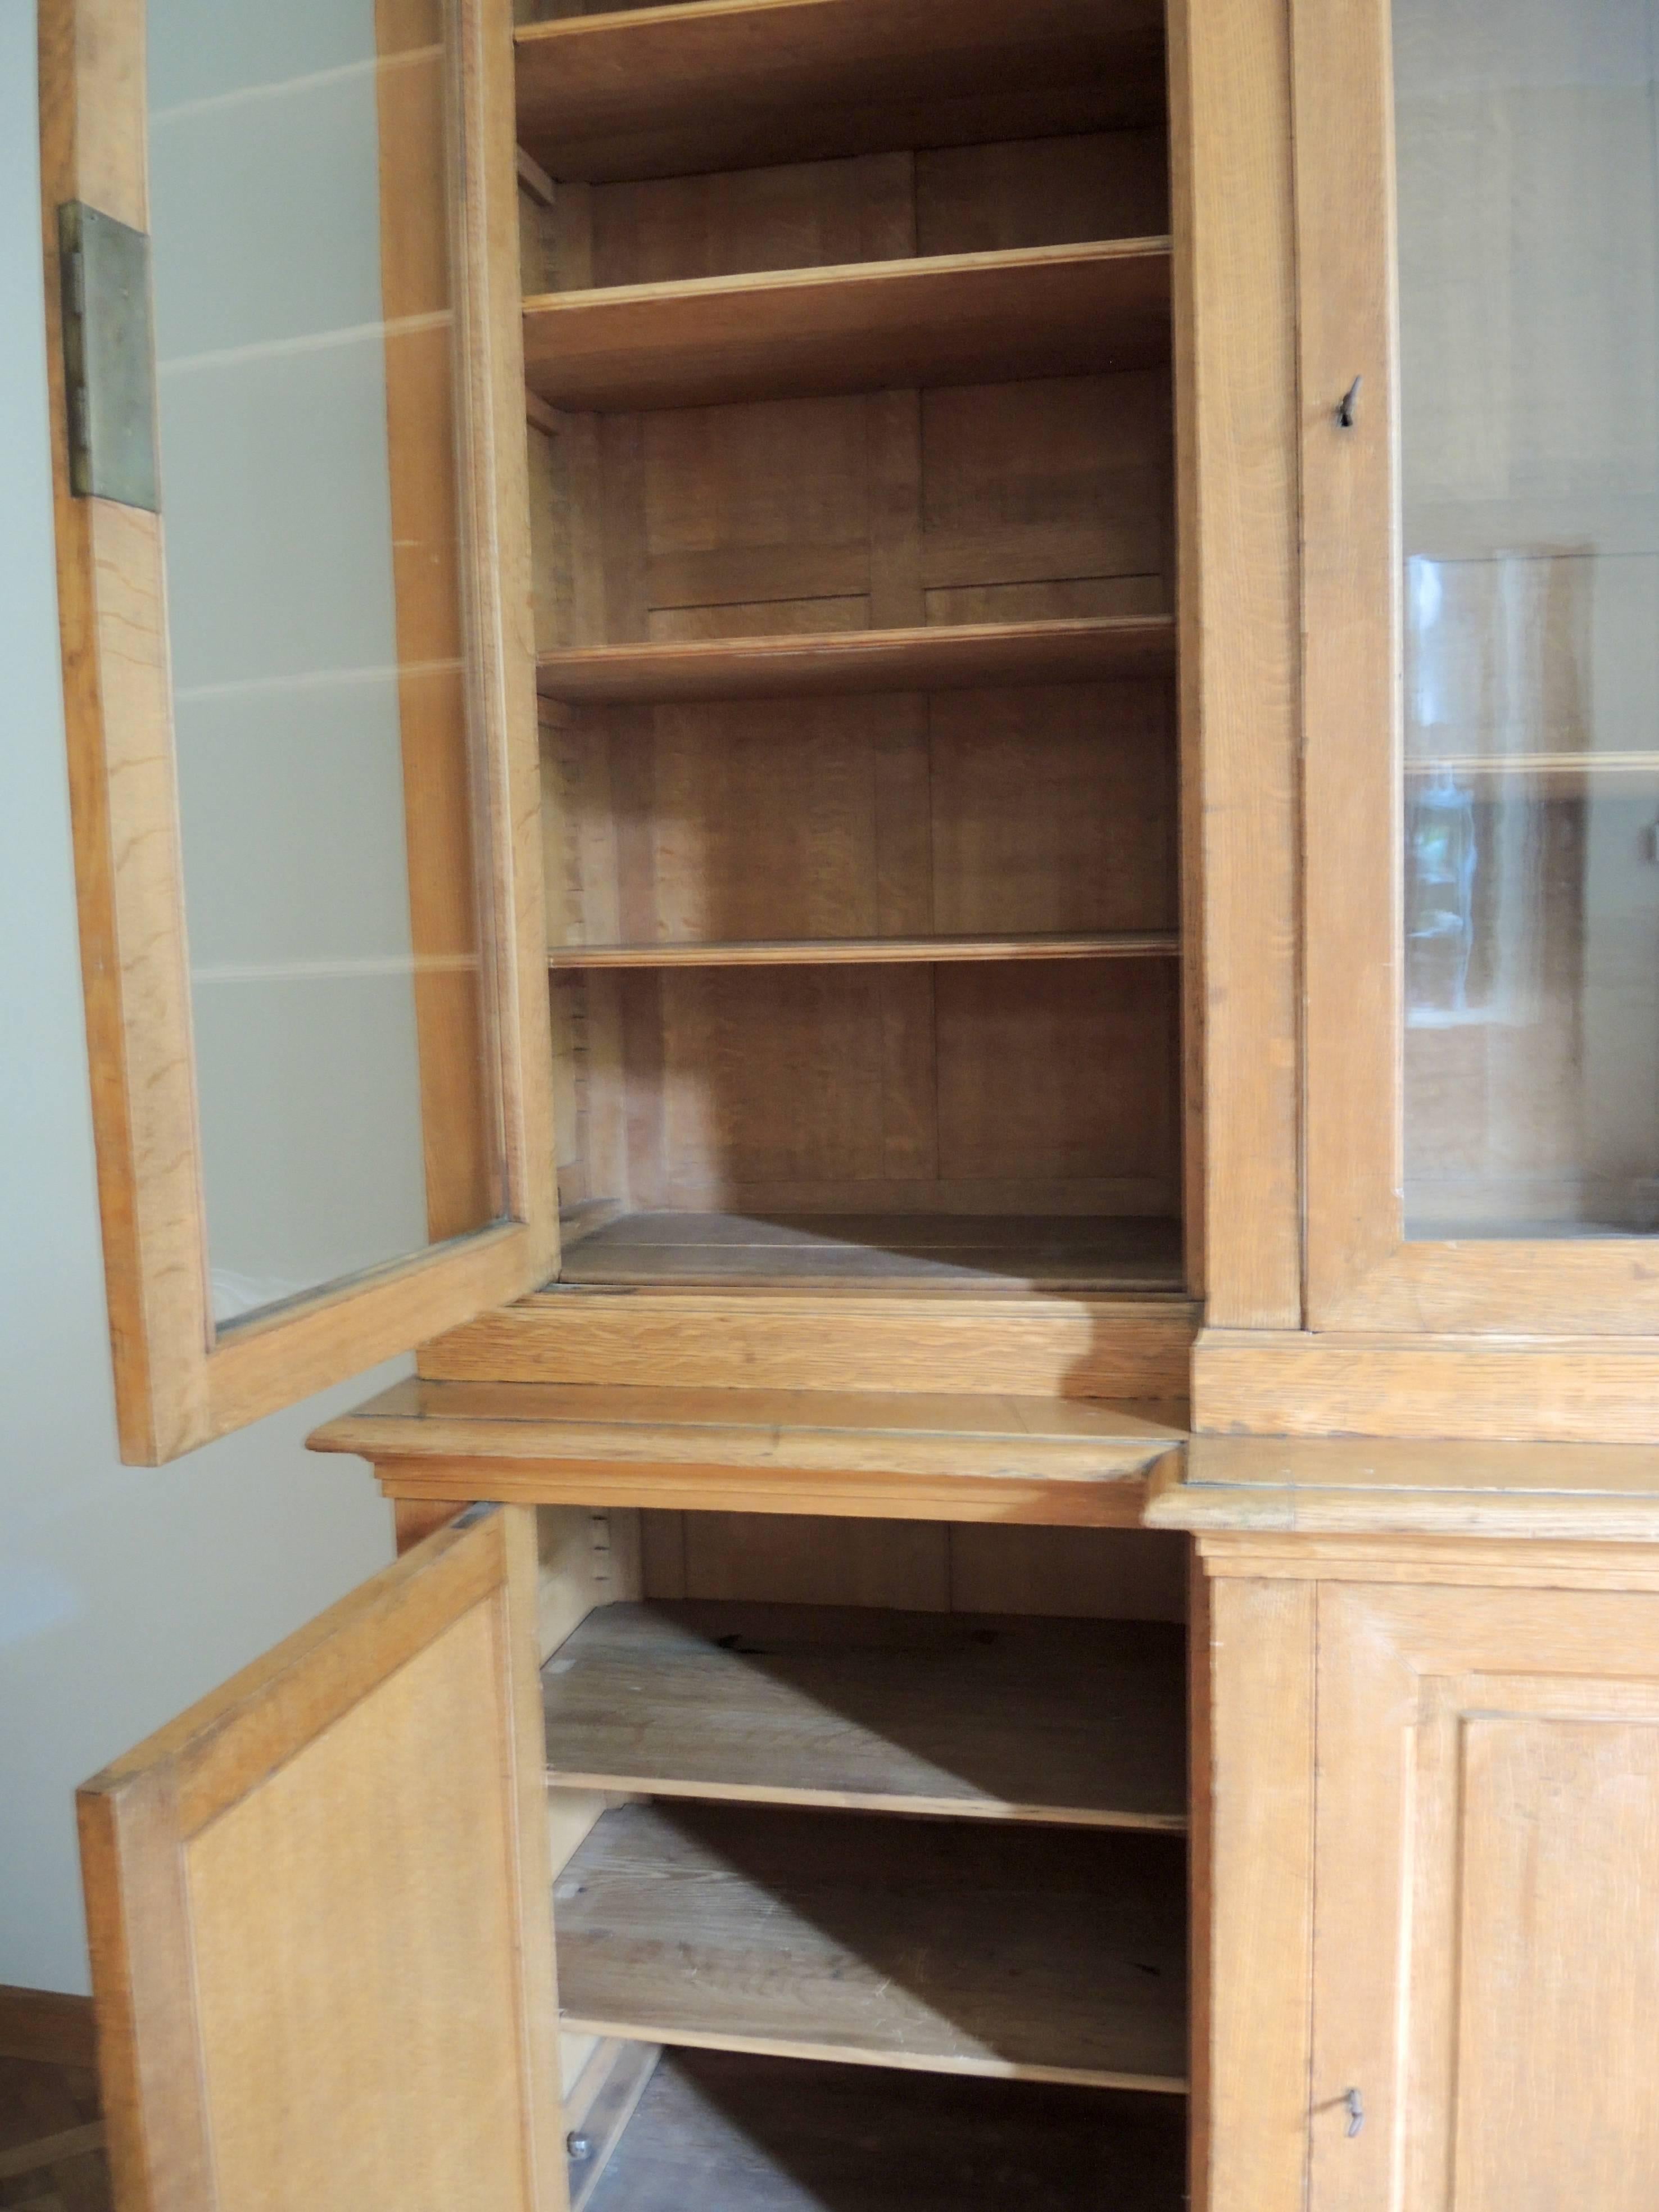 This 19th century Belgian bookcase retains the original blown glass door panels and locks. The original stepped shelf bracket system makes the shelves easily adjustable to your desired height without using any tools. Constructed in solid faded oak